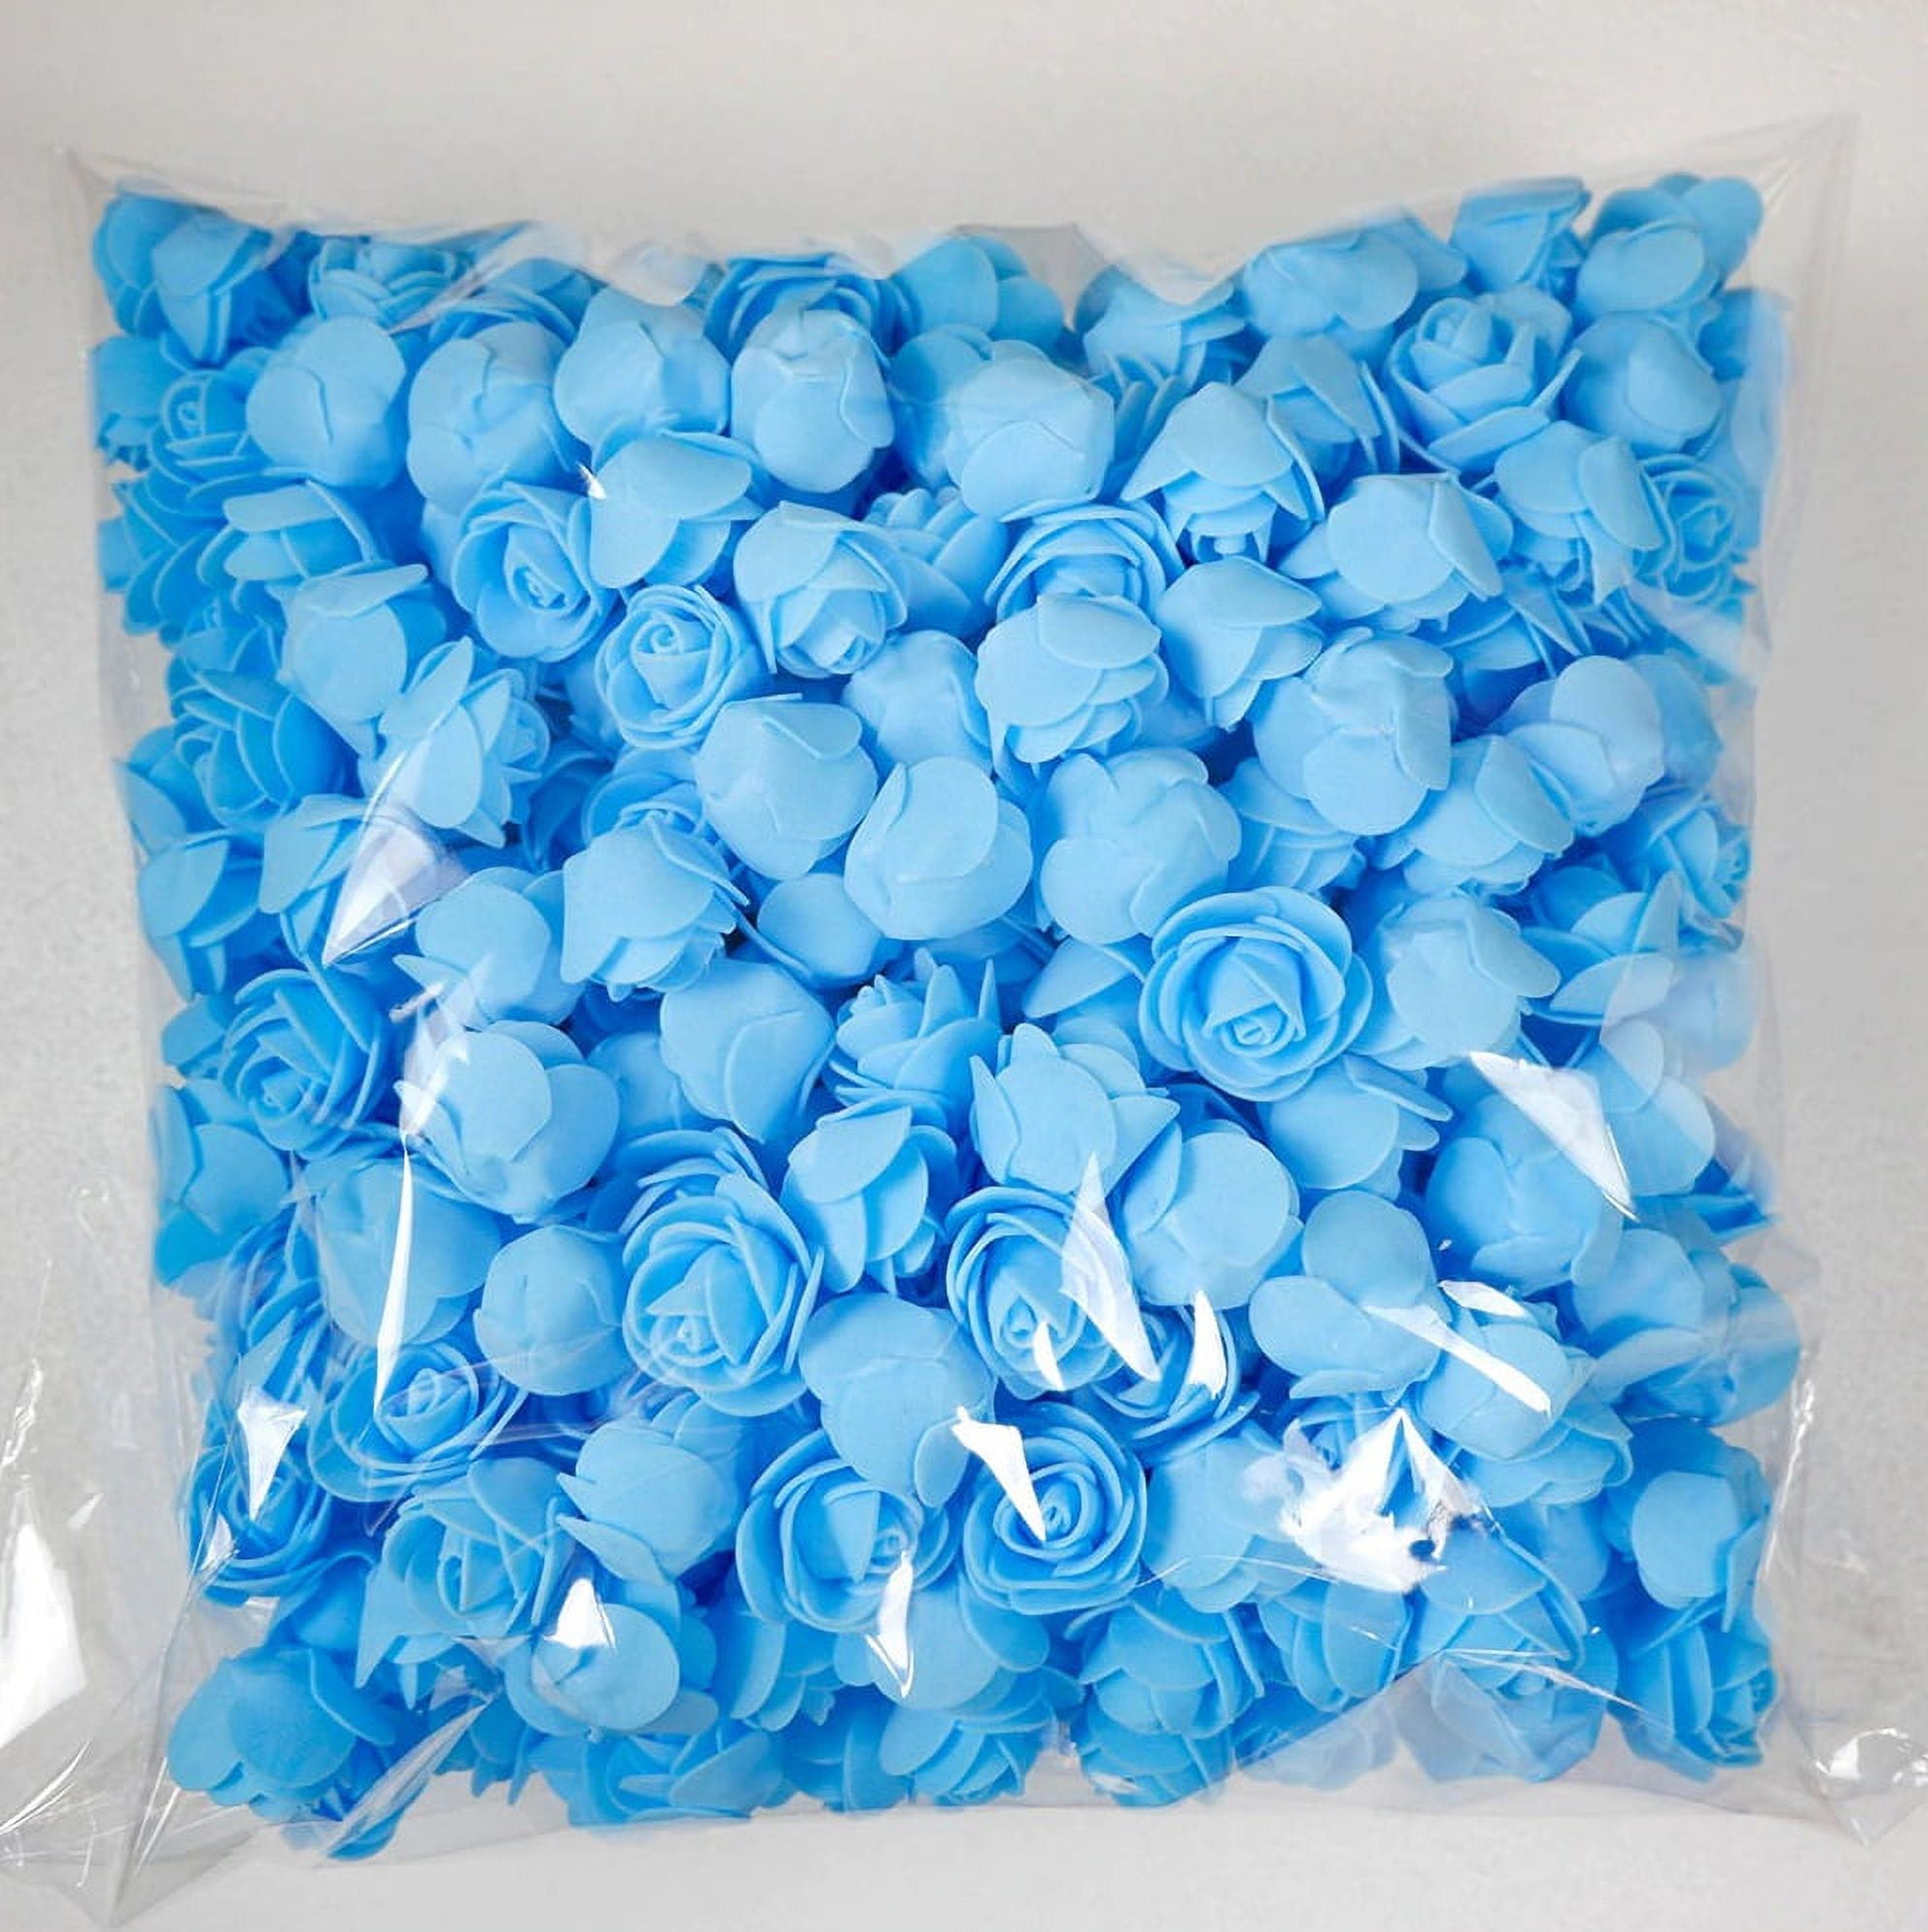 Foam Mini Roses Flower for Hair Tiaras, Home Decor, DIY Craft (200 Pieces)  Red